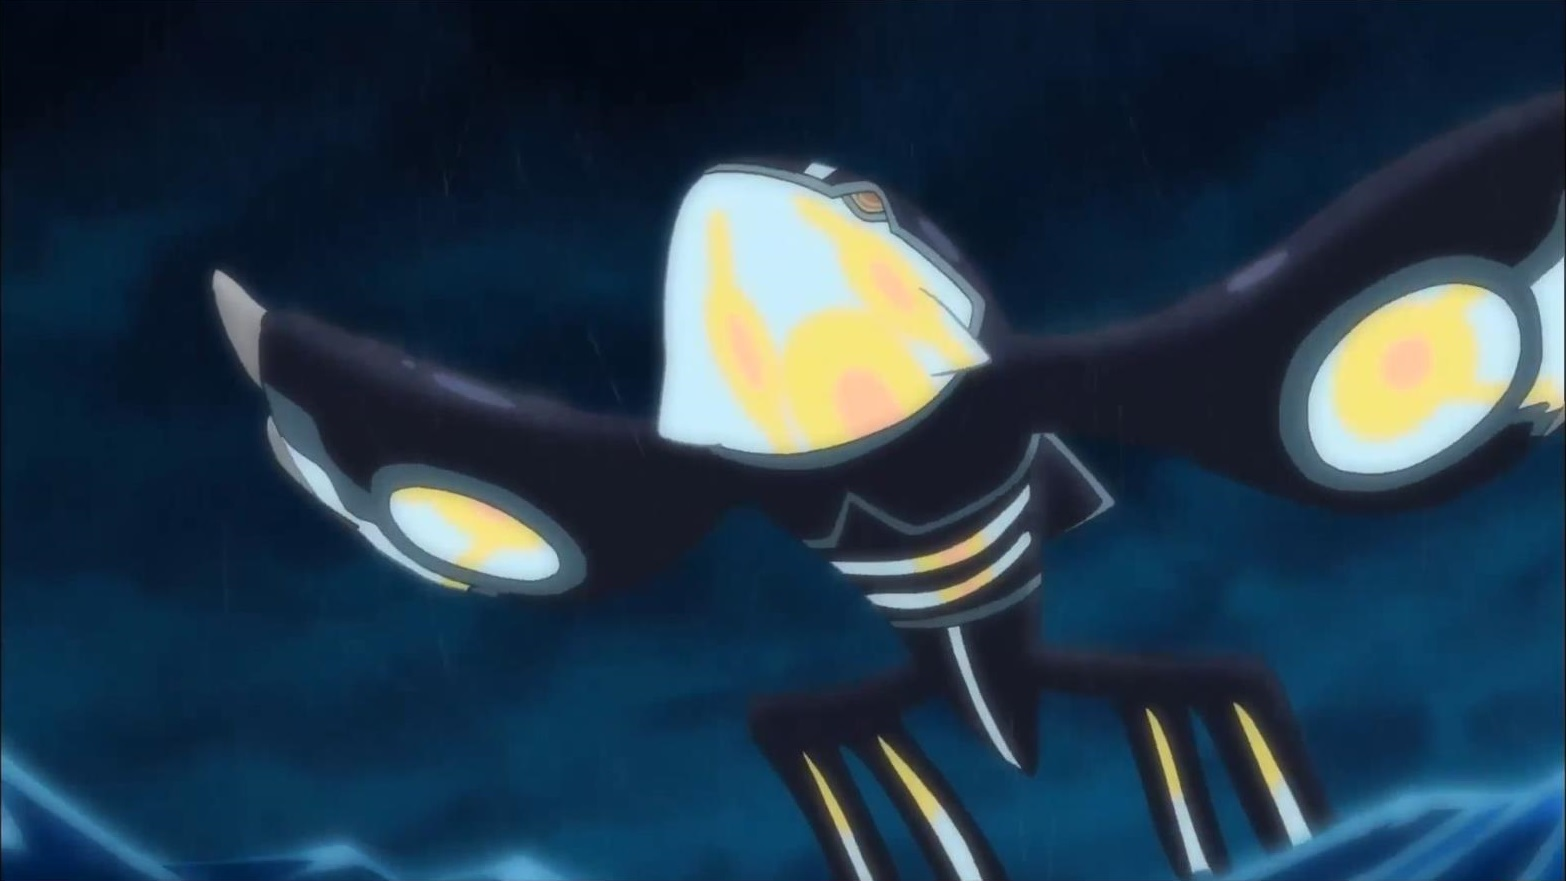 http://vignette2.wikia.nocookie.net/pokemon/images/4/46/Primal_Kyogre_Trailer_Anime.png/revision/